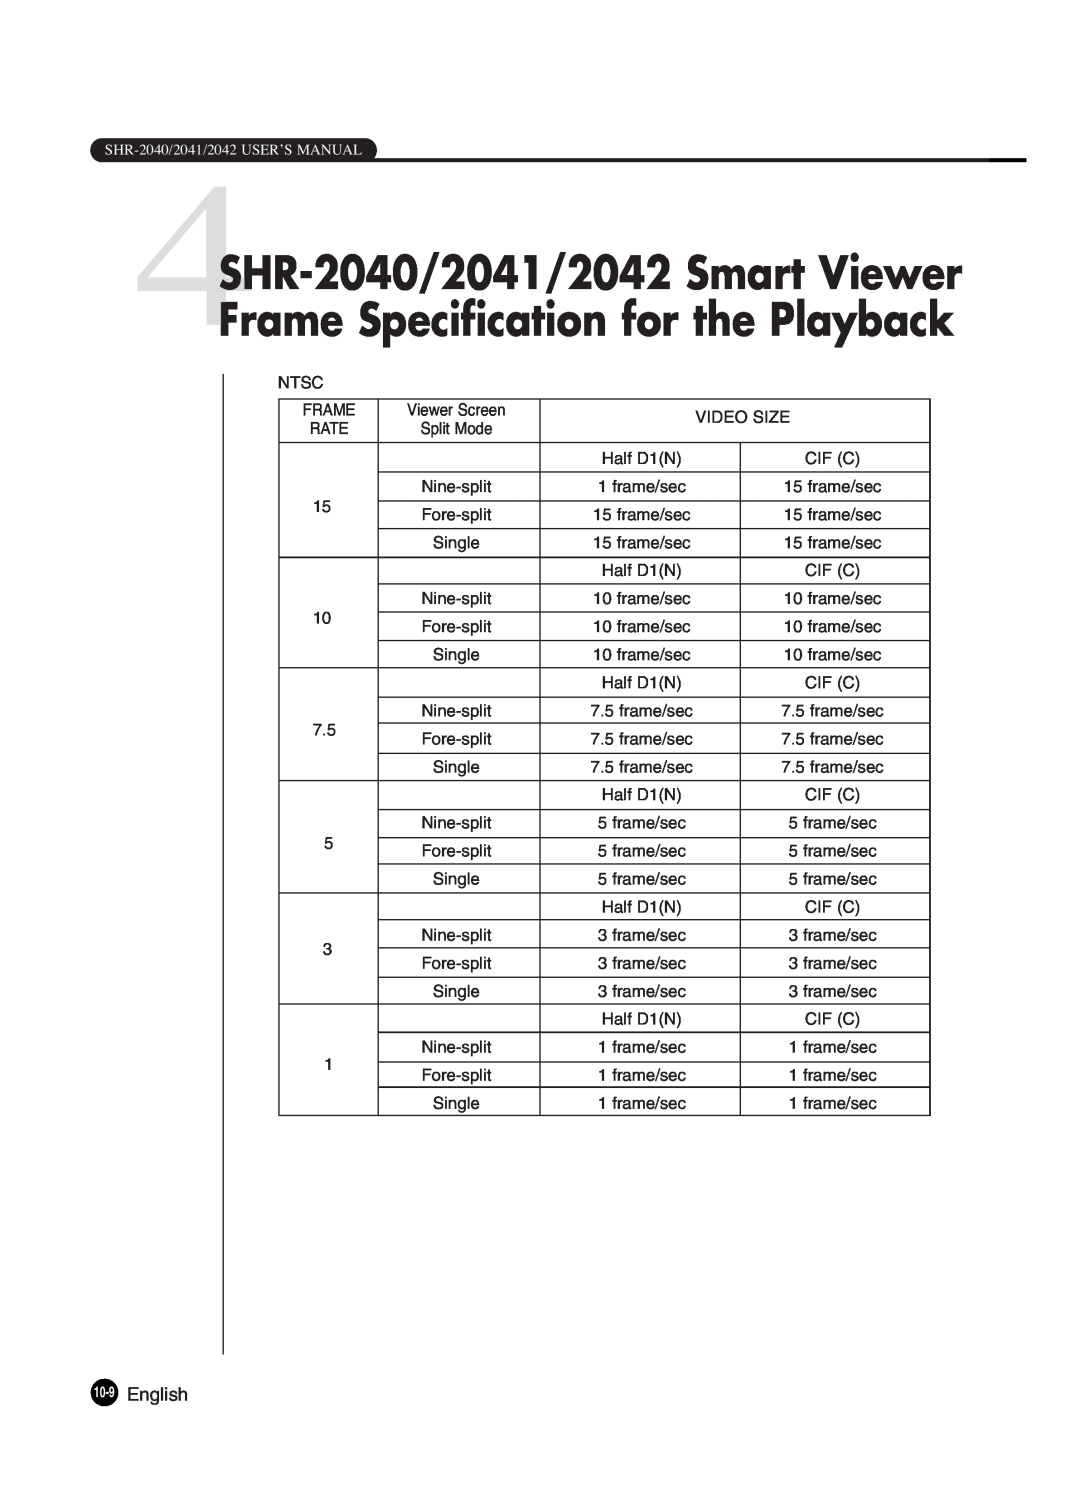 Samsung SHR-2042P250, SHR-2040P250 manual 4SHR-2040/2041/2042 Smart Viewer Frame Specification for the Playback, English 